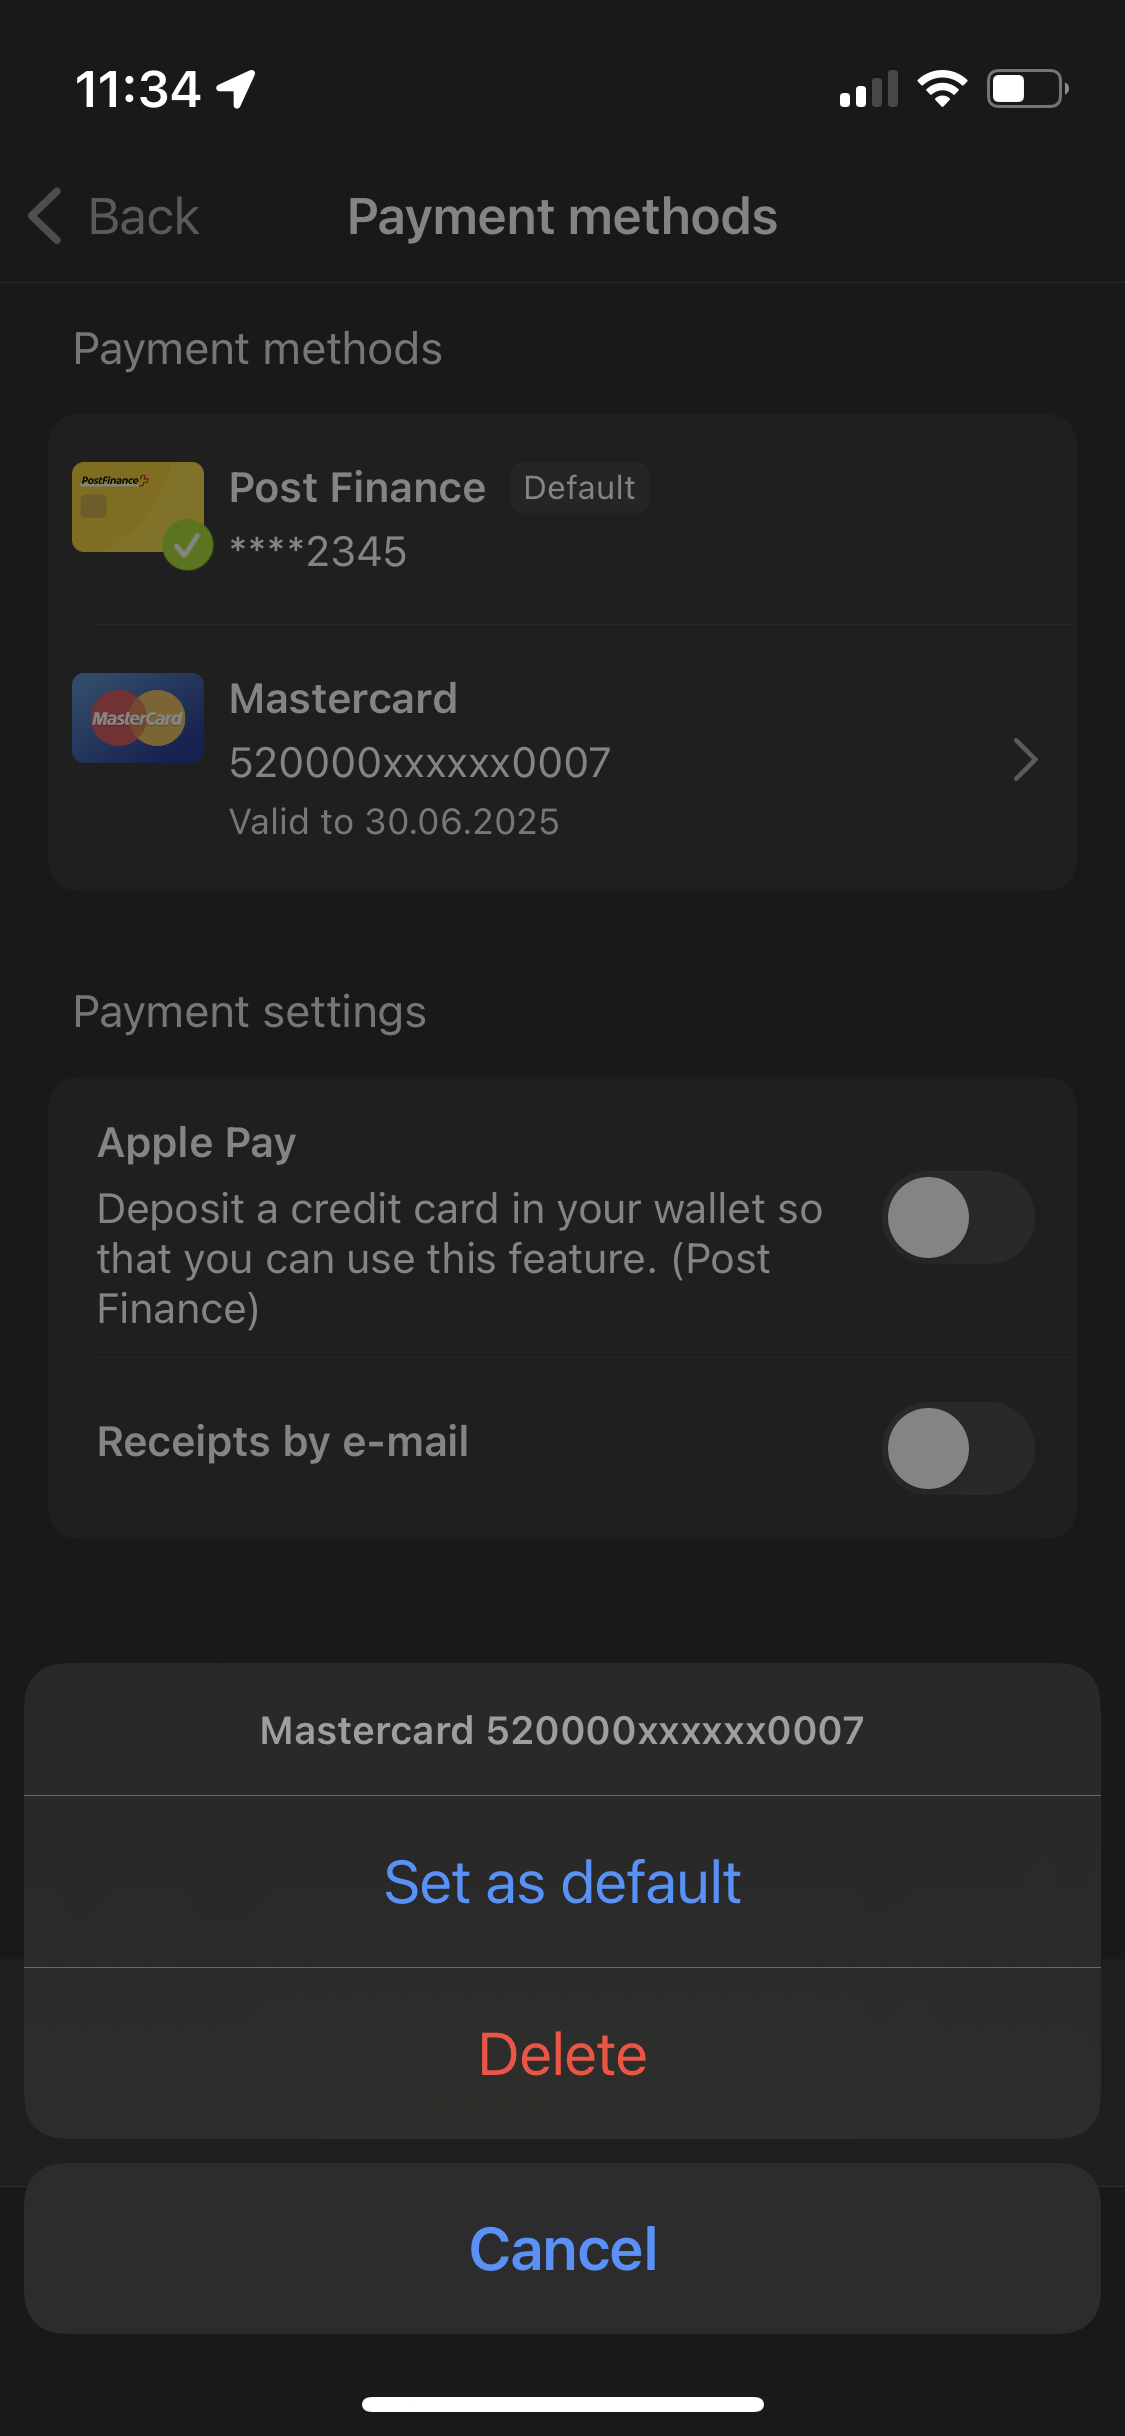 09.22delete_payment_method.PNG